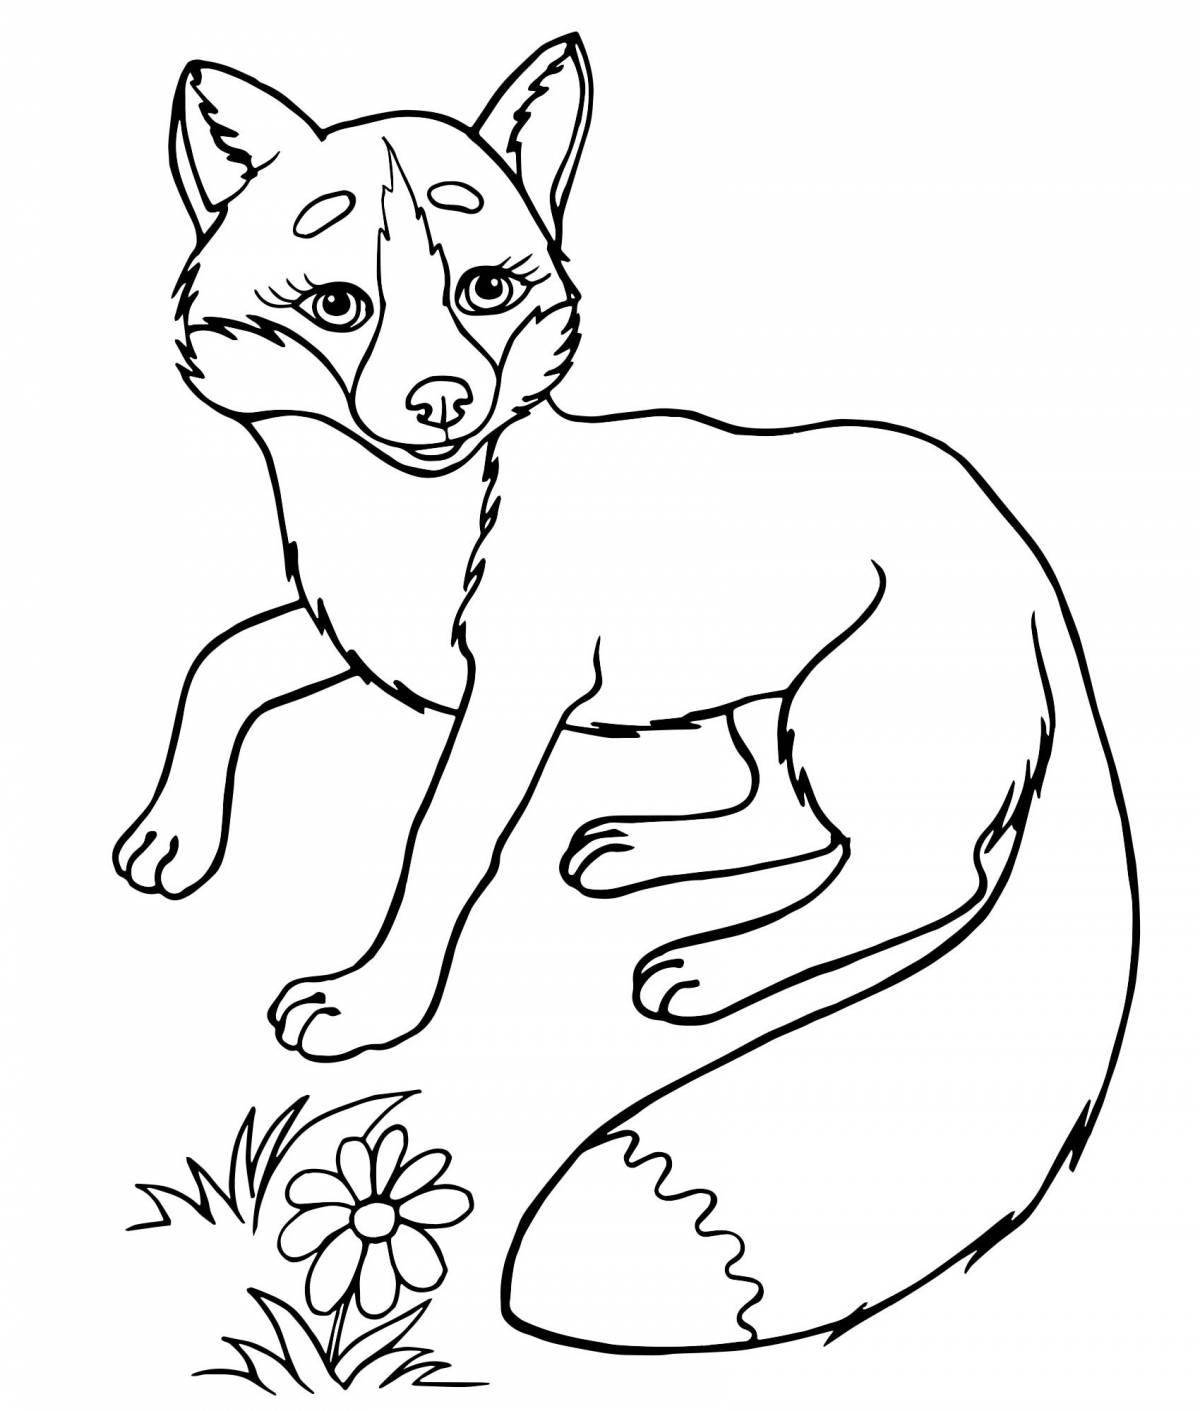 Colourful fox coloring book for kids